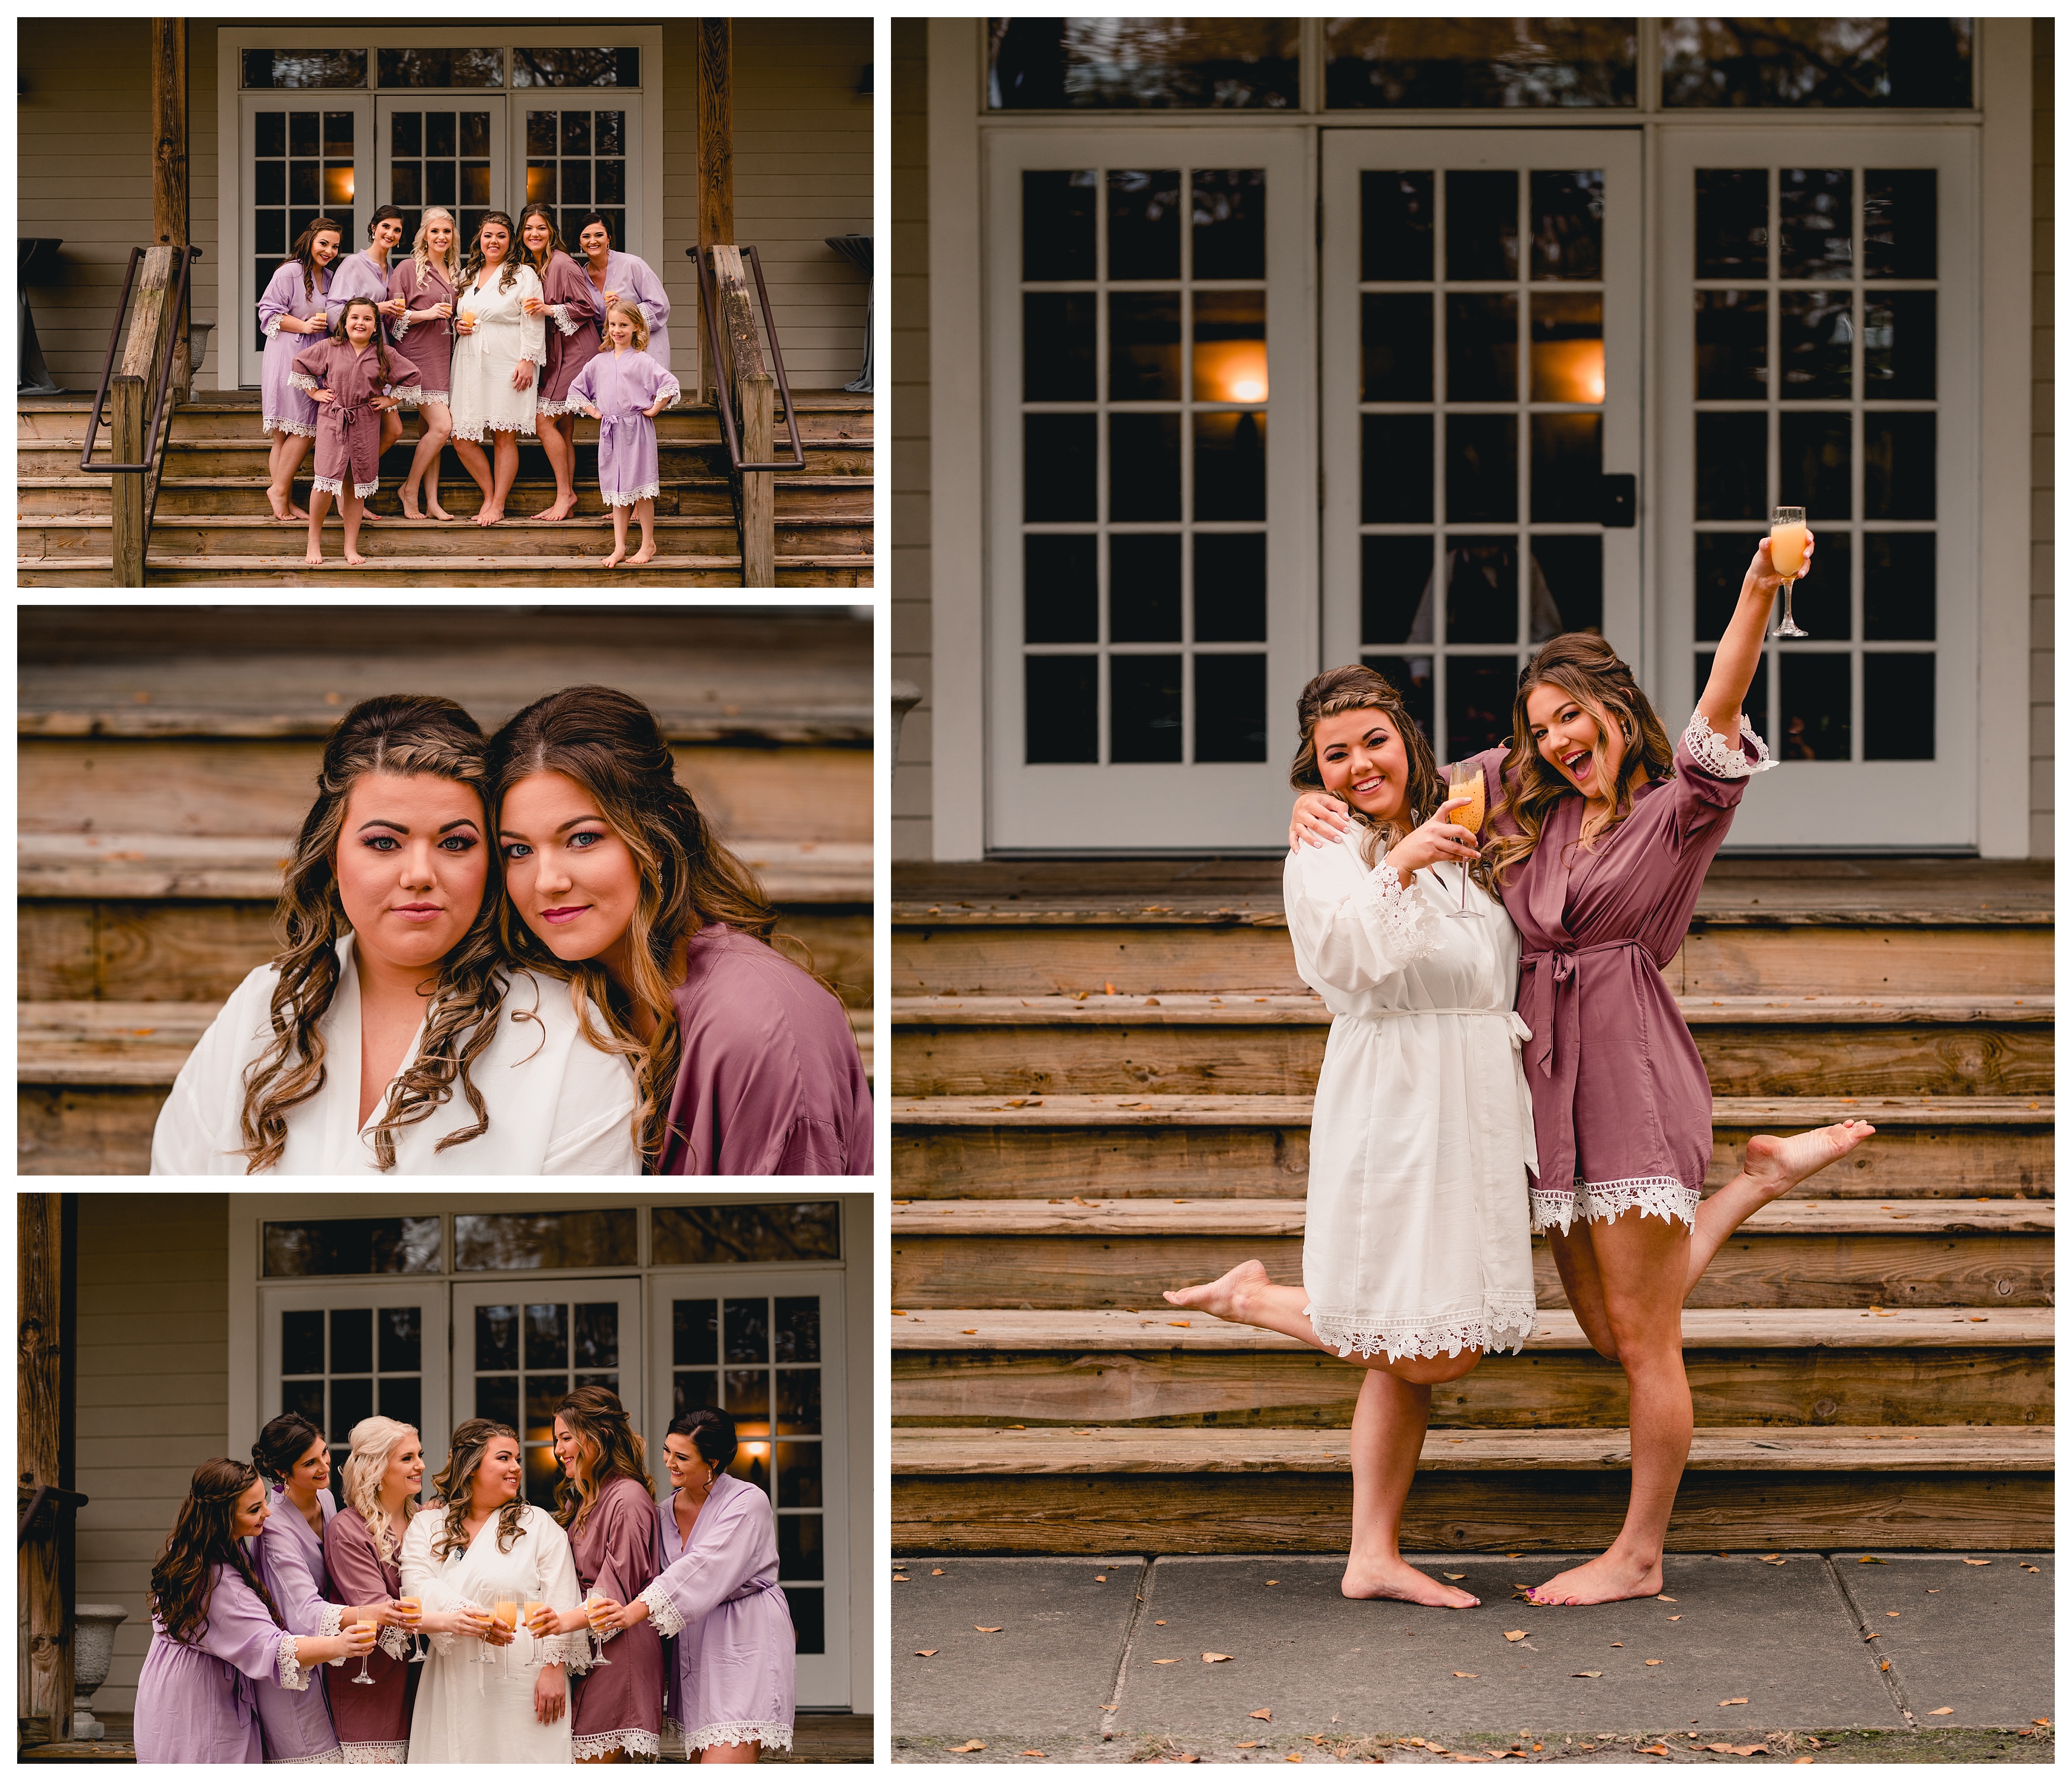 Robe photos of bride with her bridesmaids at Bradley's Pond in Tallahassee, FL. Shelly Williams Photography